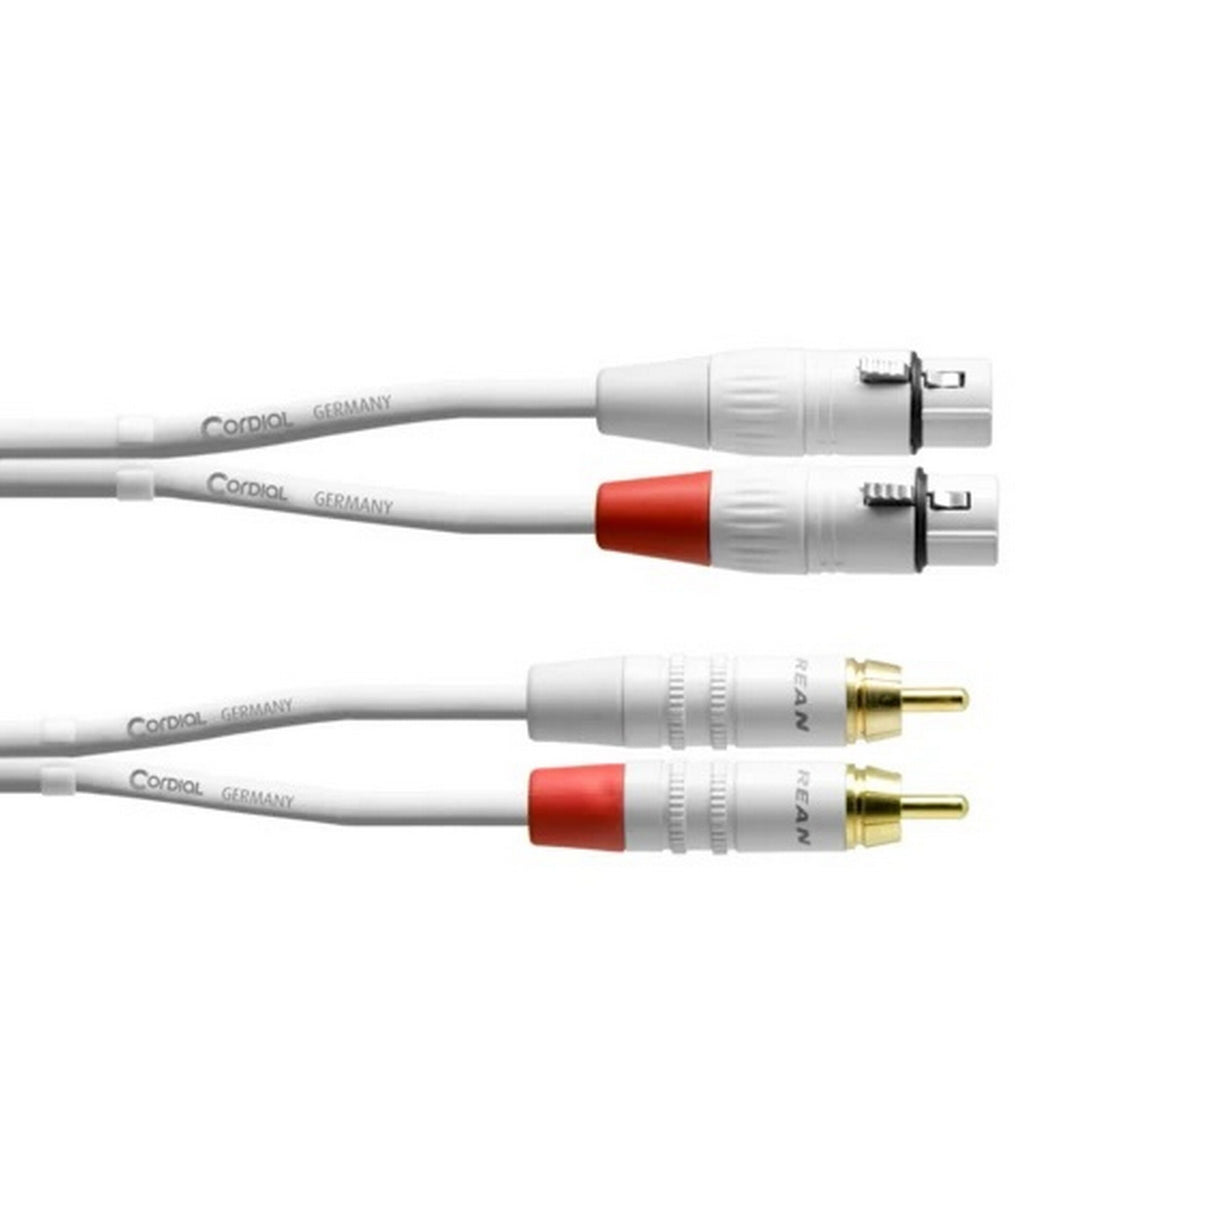 Cordial CFU 1.5 FC-SNOW 2 x XLRF to 2 x RCA Twin Cable/Adapter, White, 5-Feet